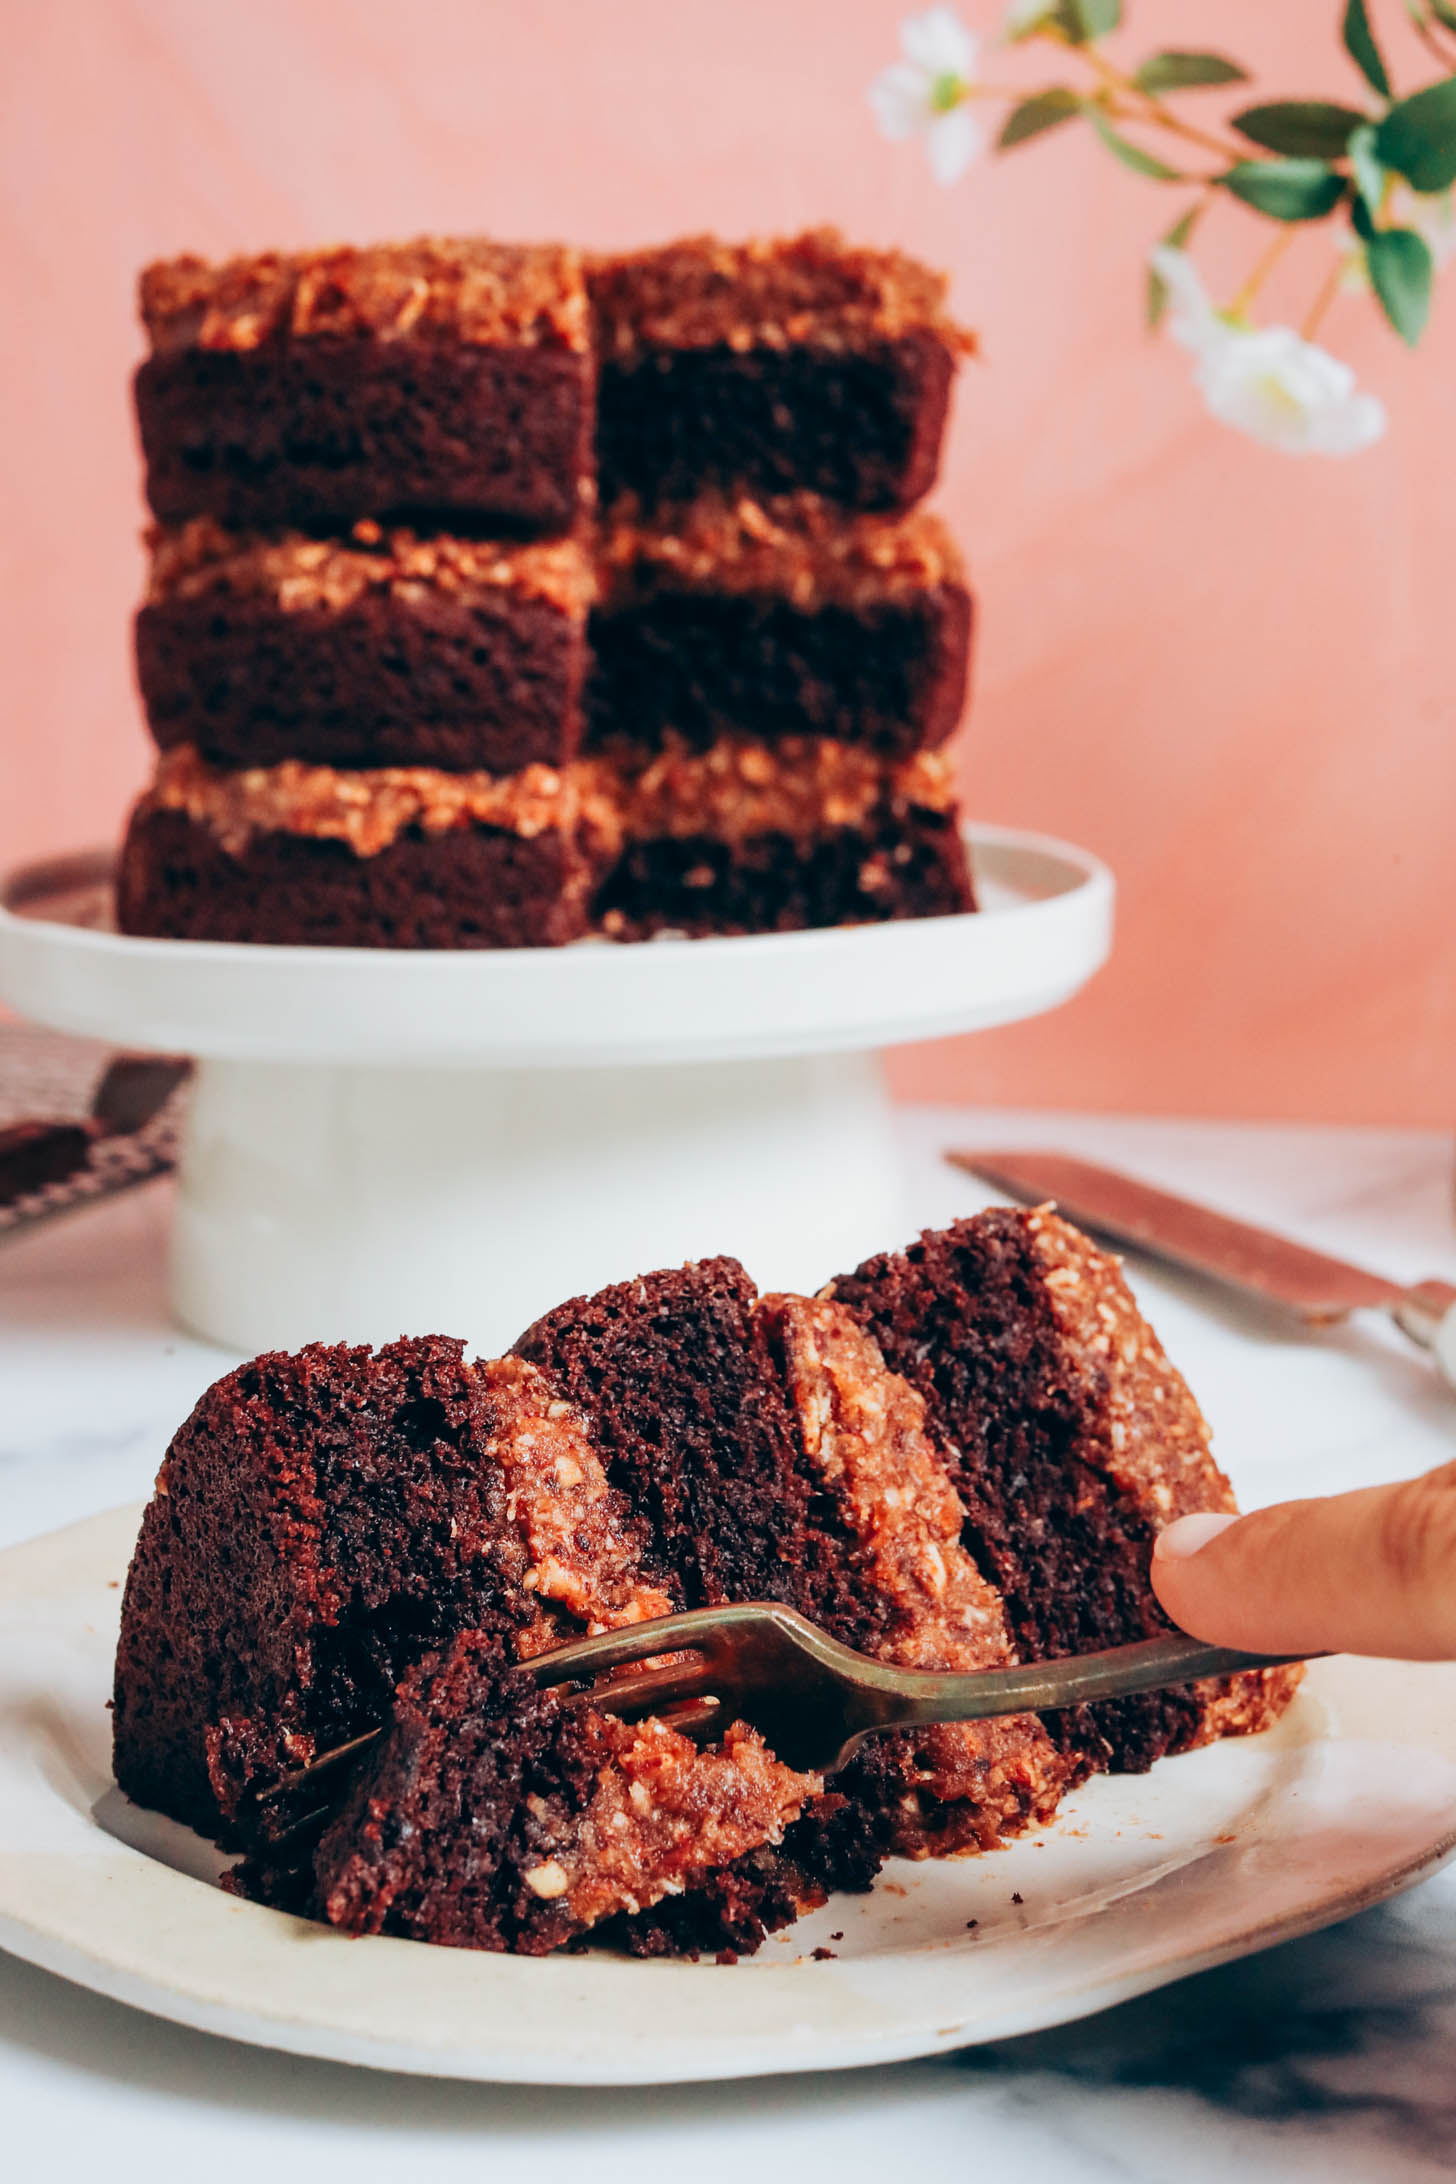 Cutting with a fork into a slice of gluten-free vegan German chocolate cake